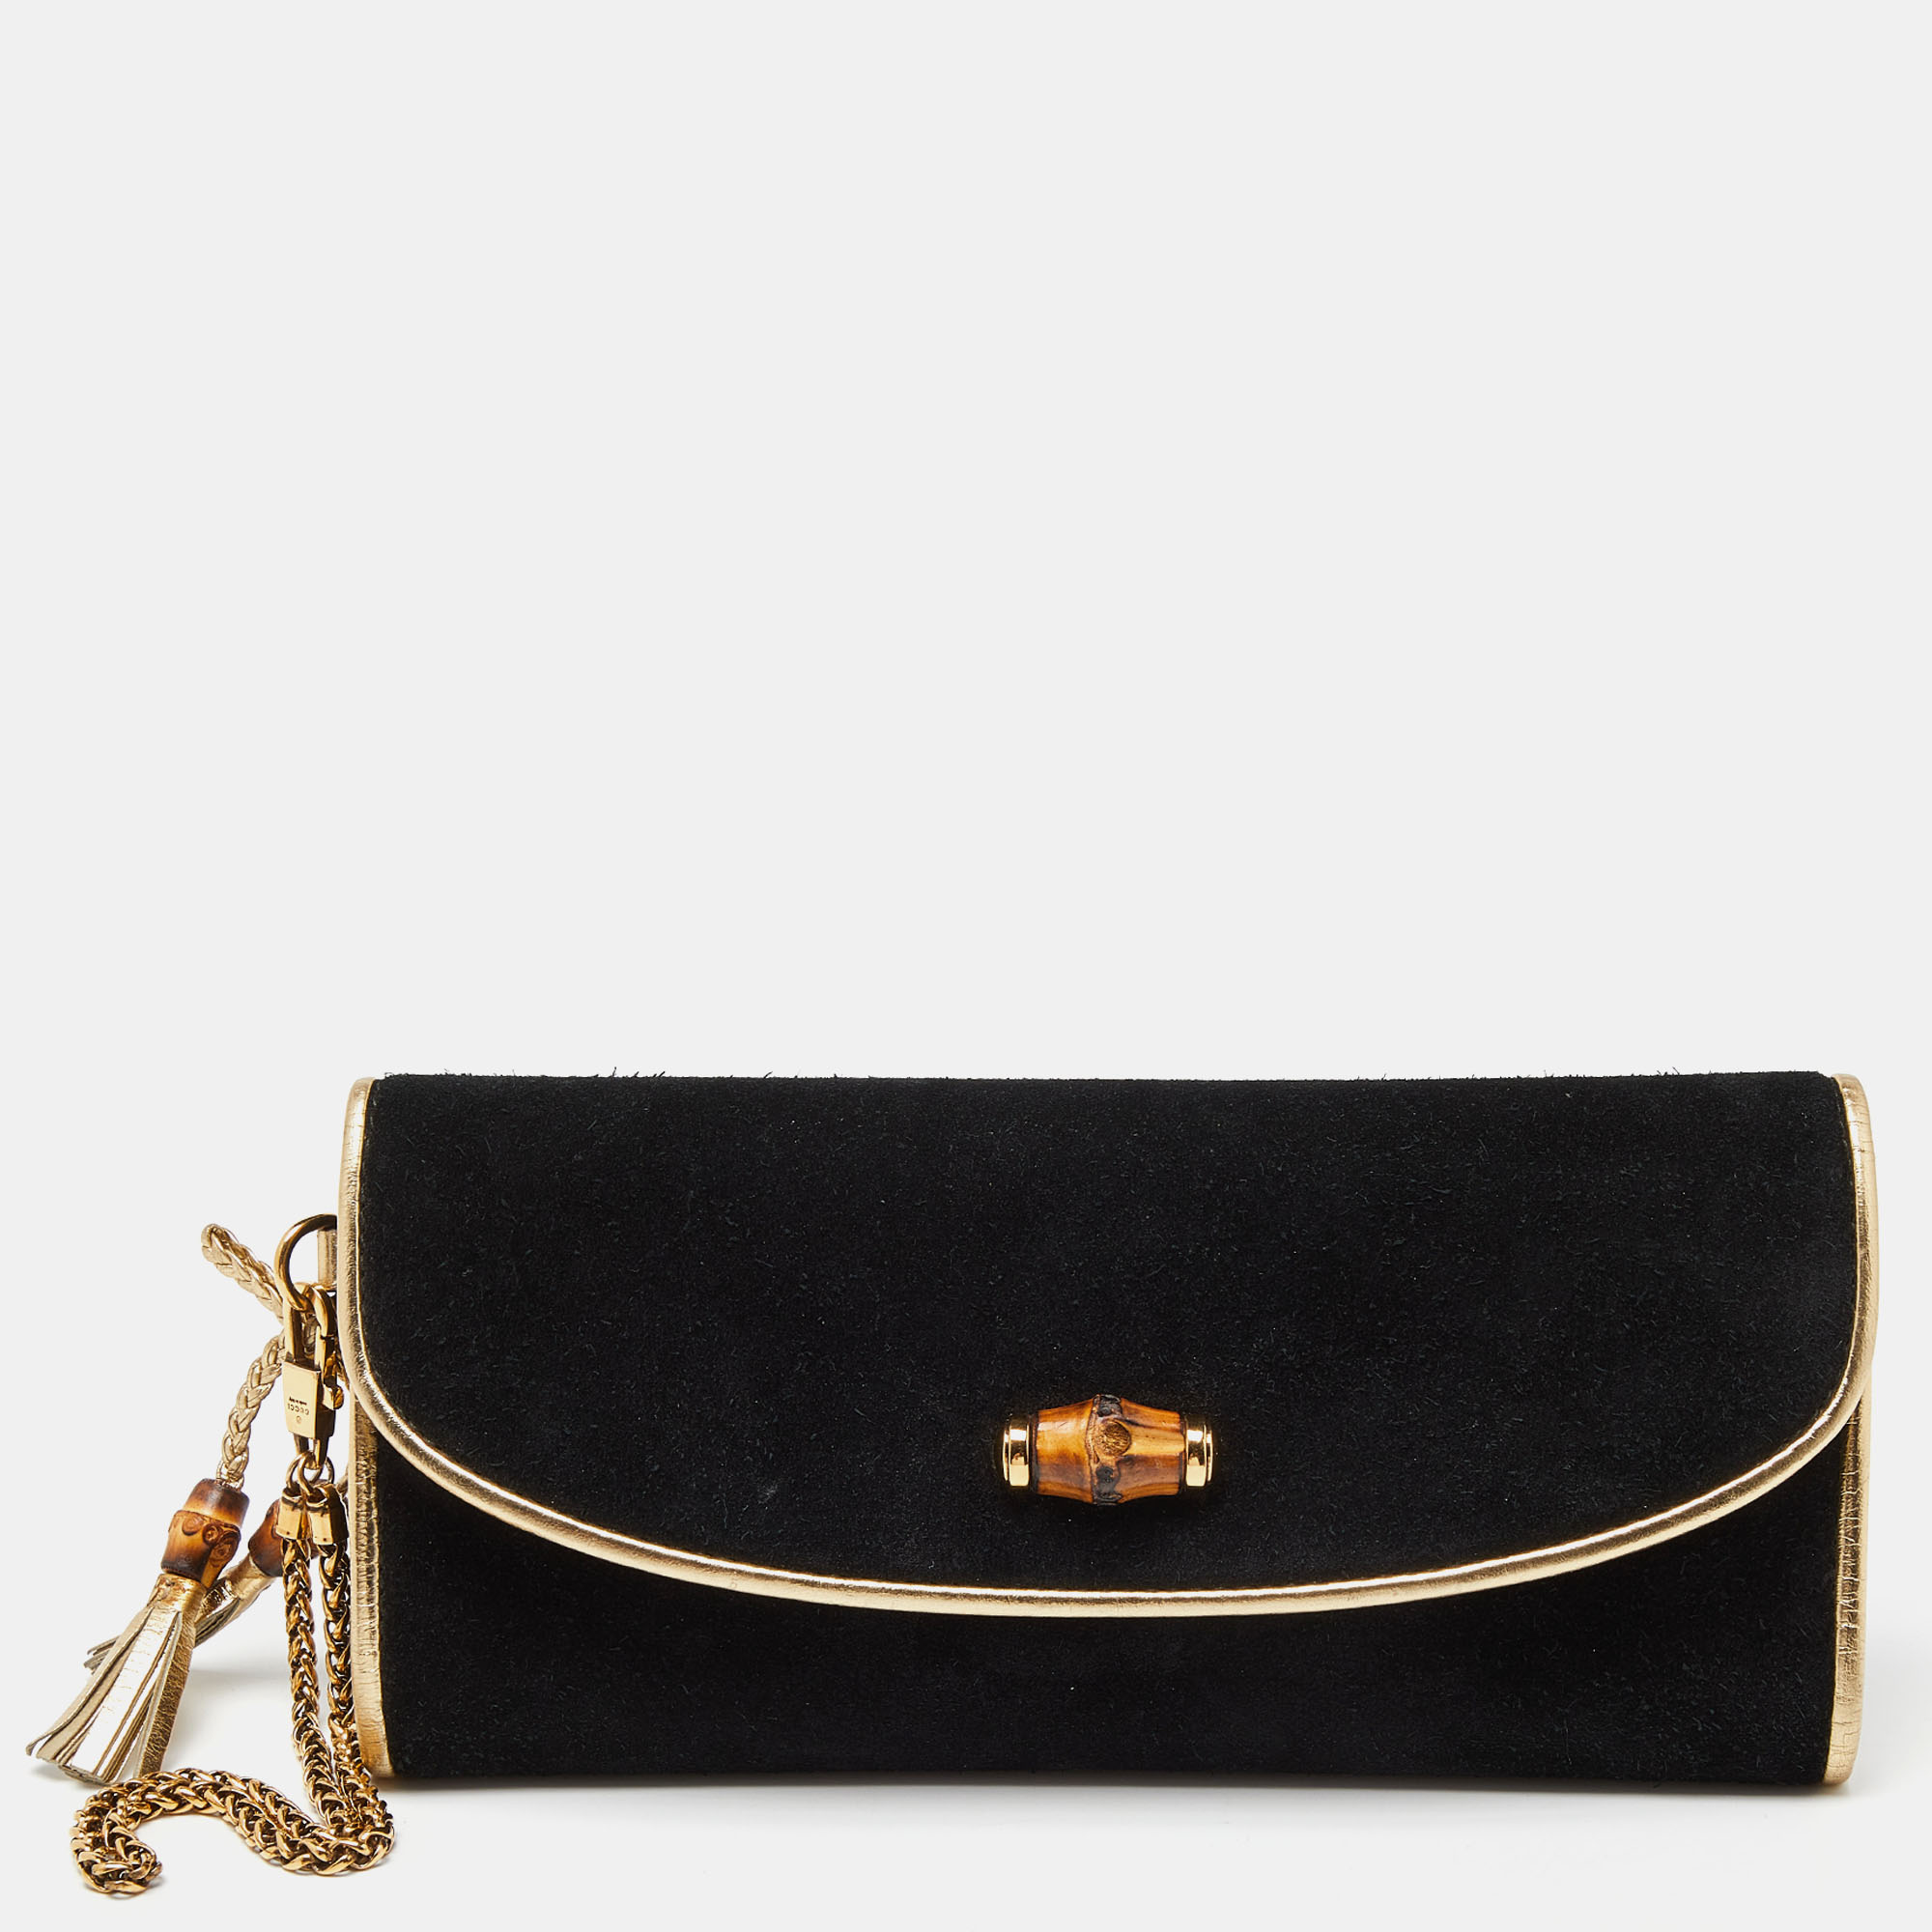 Pre-owned Gucci Black/gold Suede Bamboo Wristlet Clutch